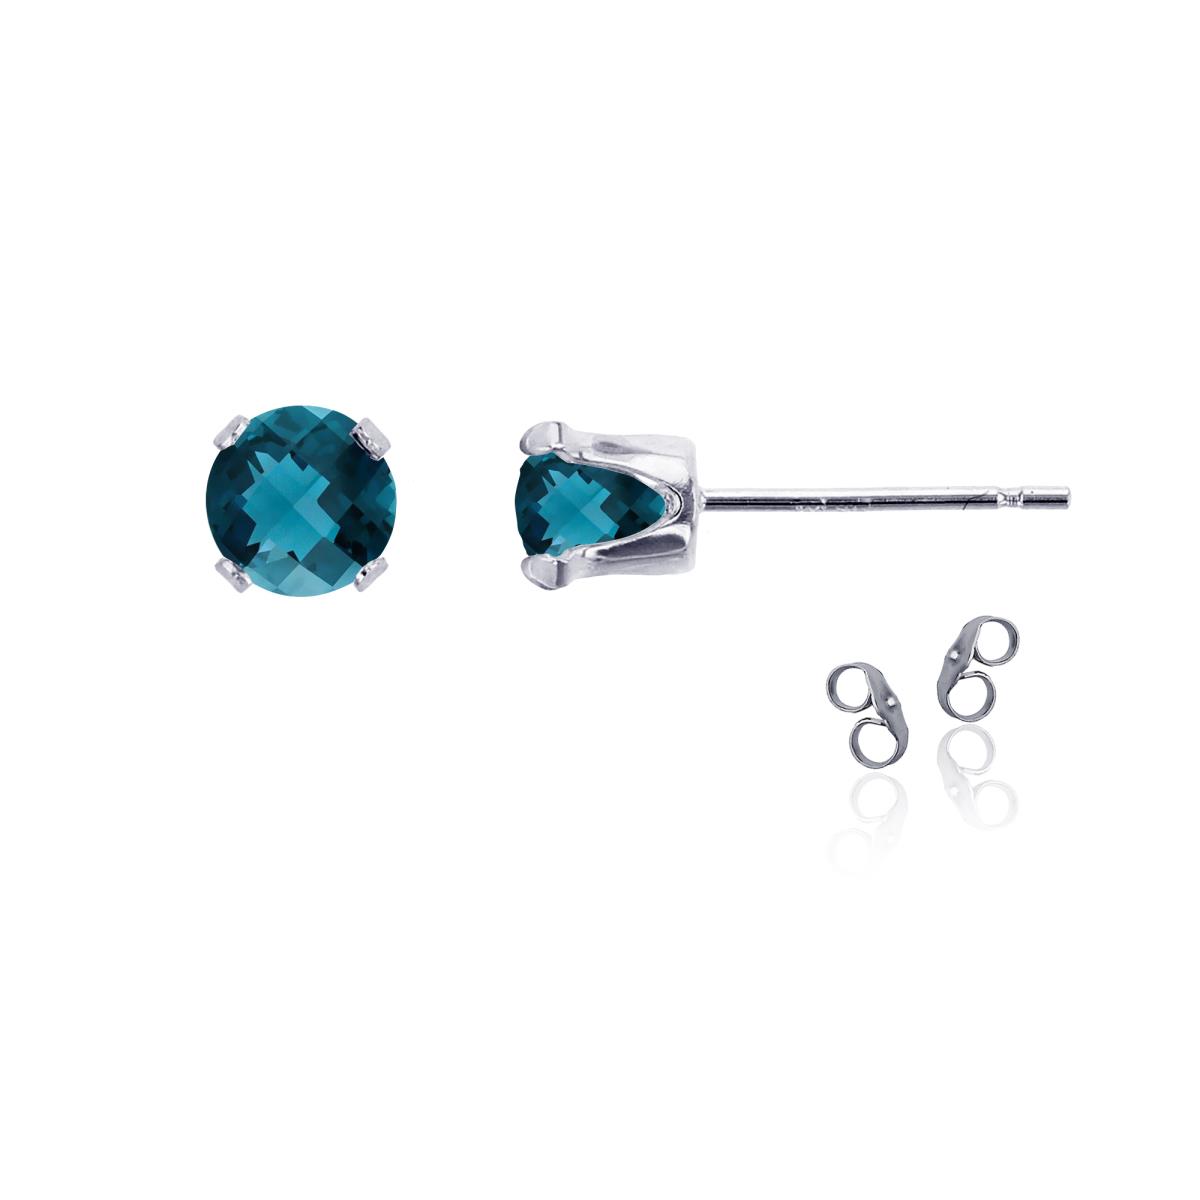 Sterling Silver Rhodium 7mm Round London Blue Topaz Stud Earring with Clutch